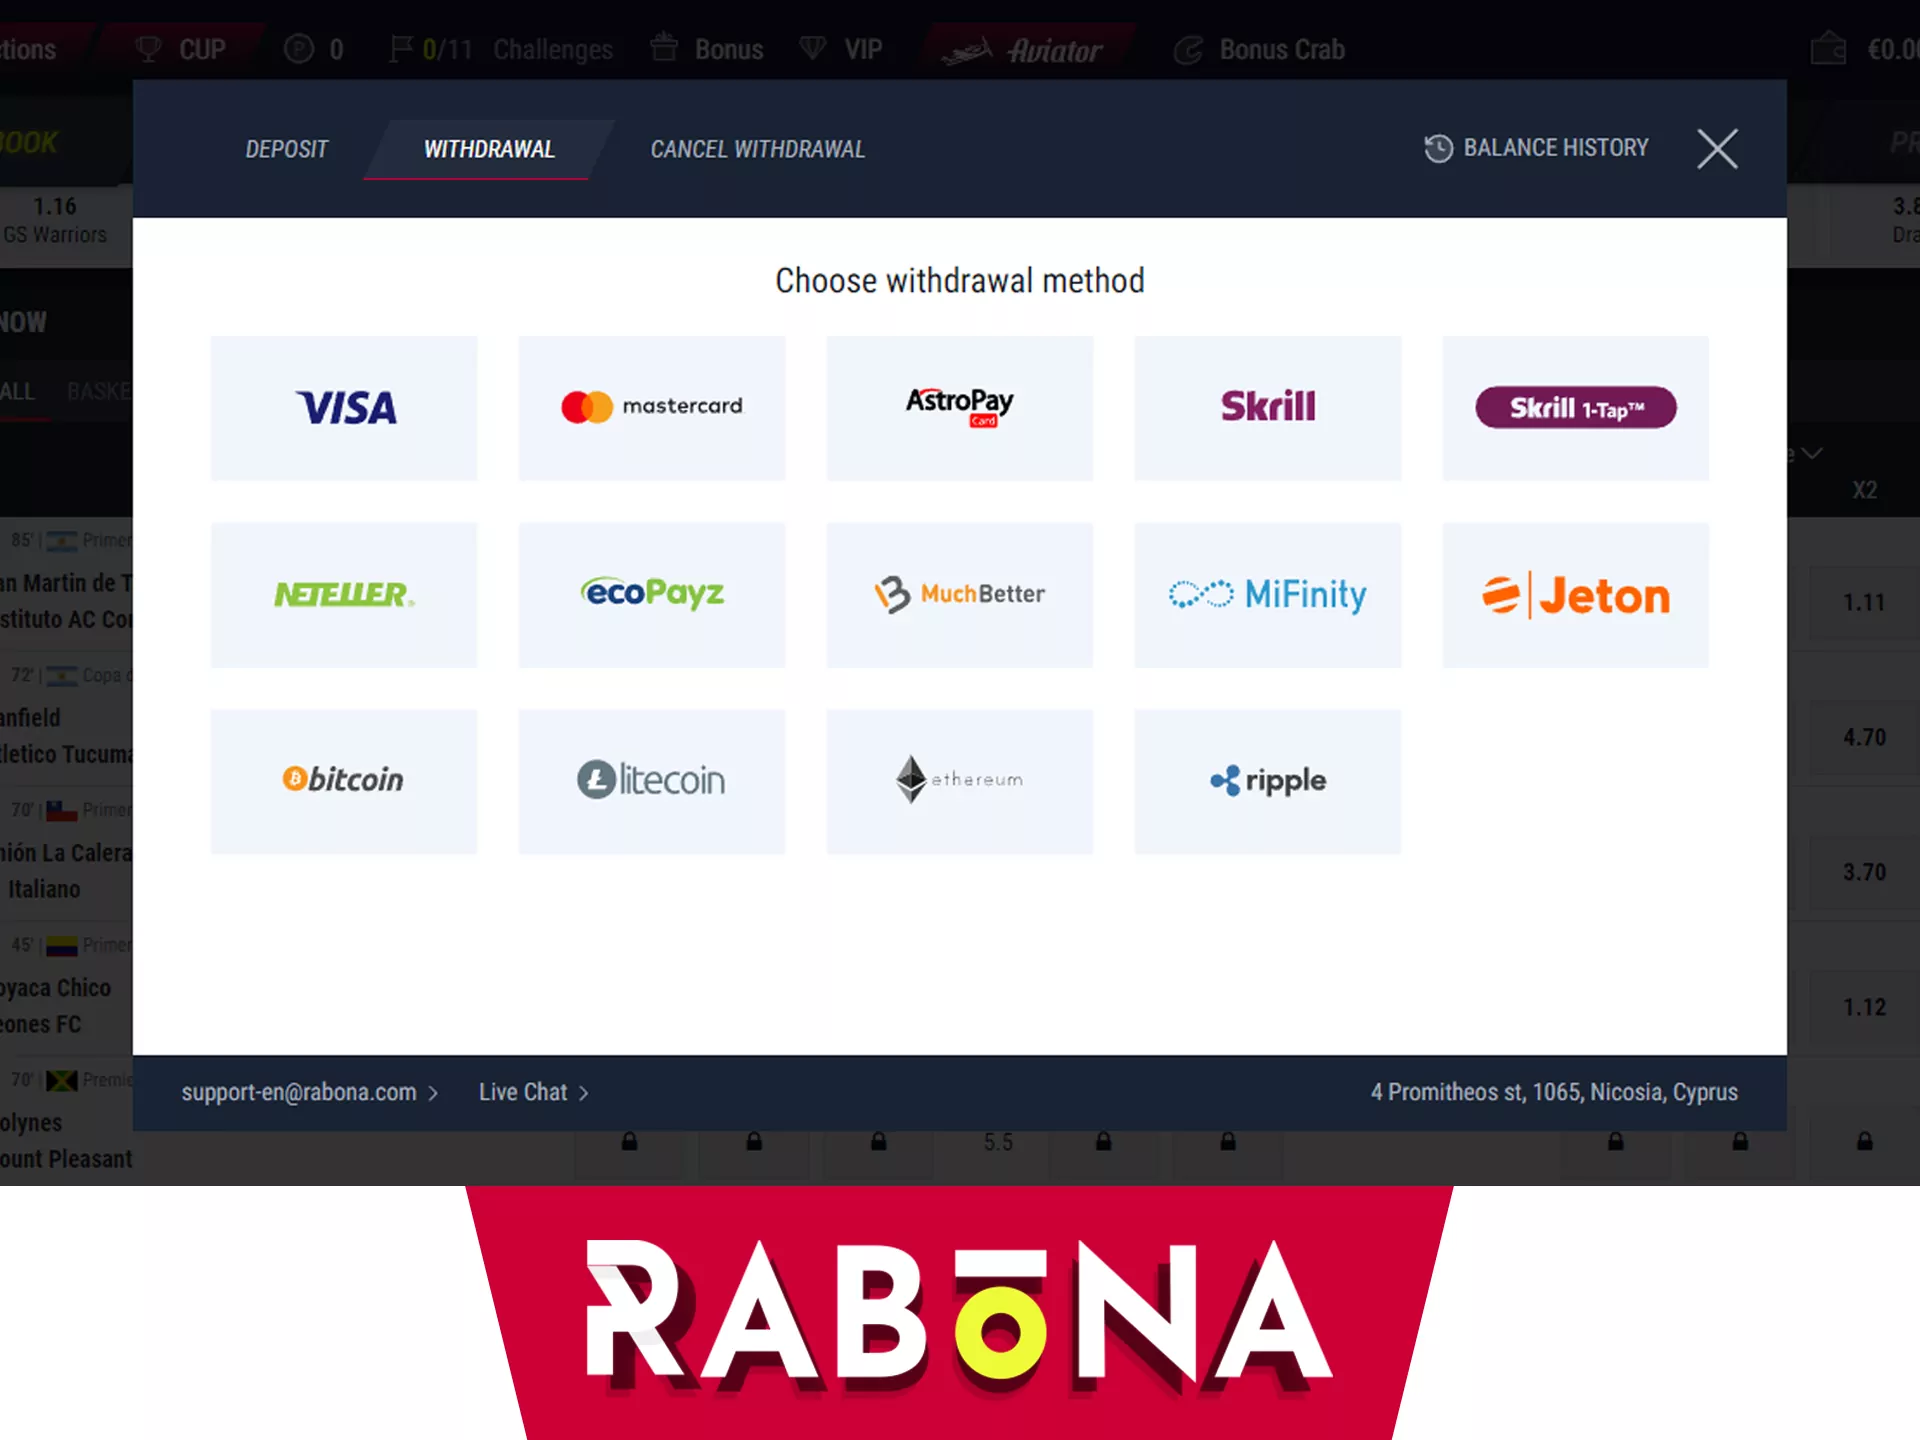 Choose your favourite withdrawal method at Rabona.